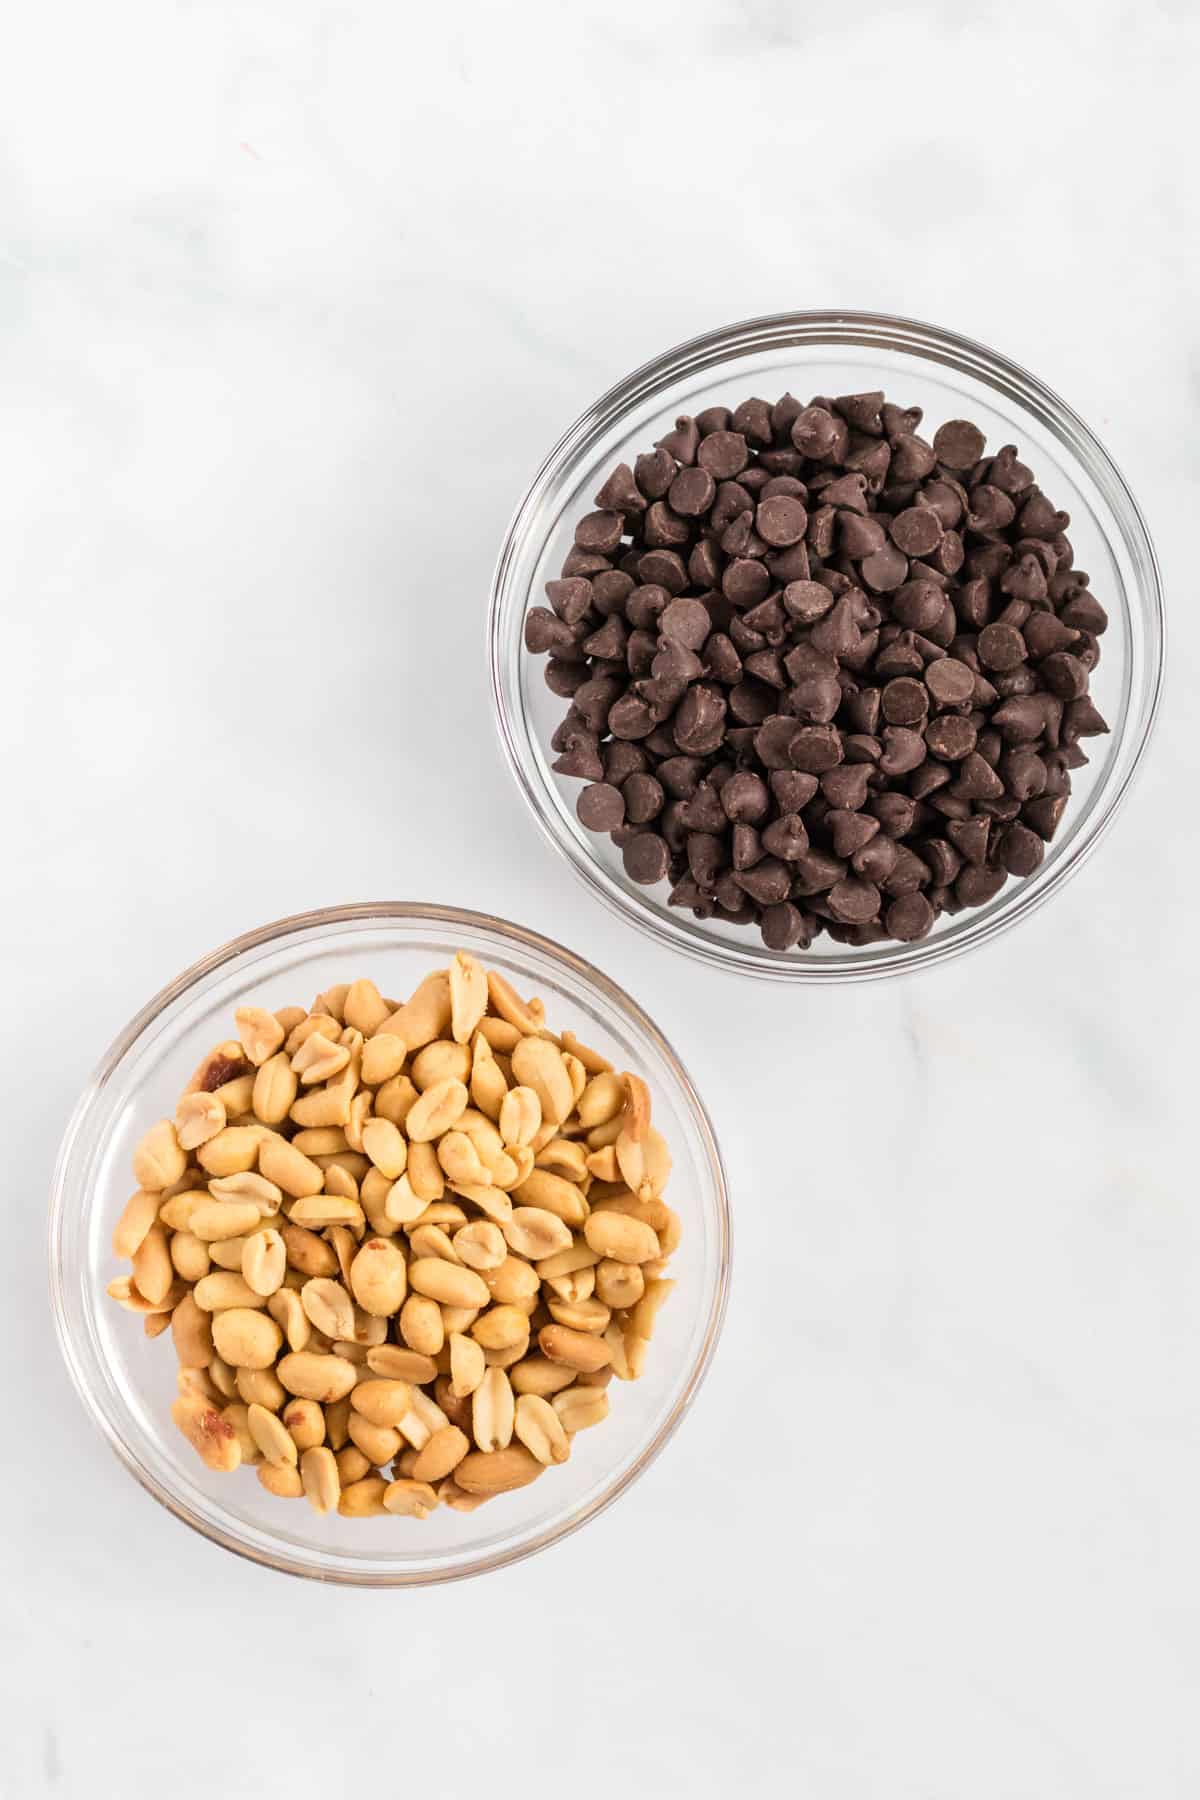 chocolate chips and peanuts in bowls